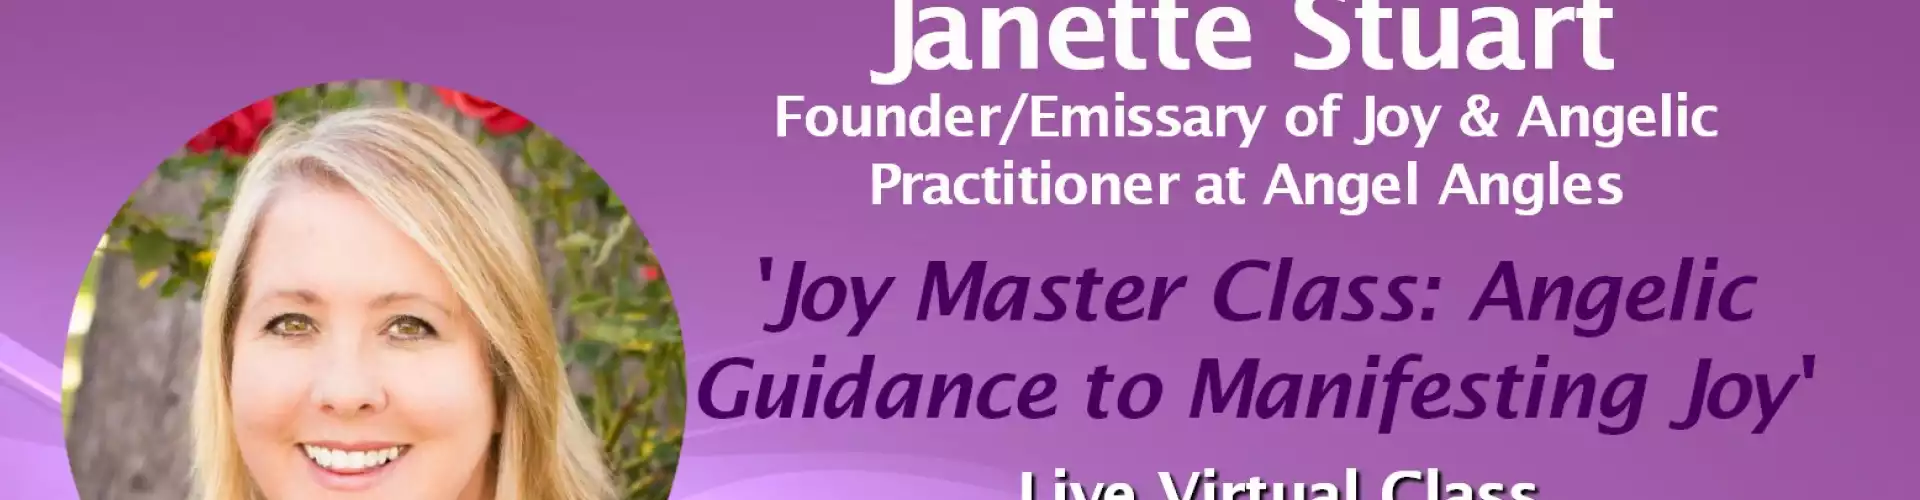 Joy Master Class with WU Featured Expert Janette Stuart